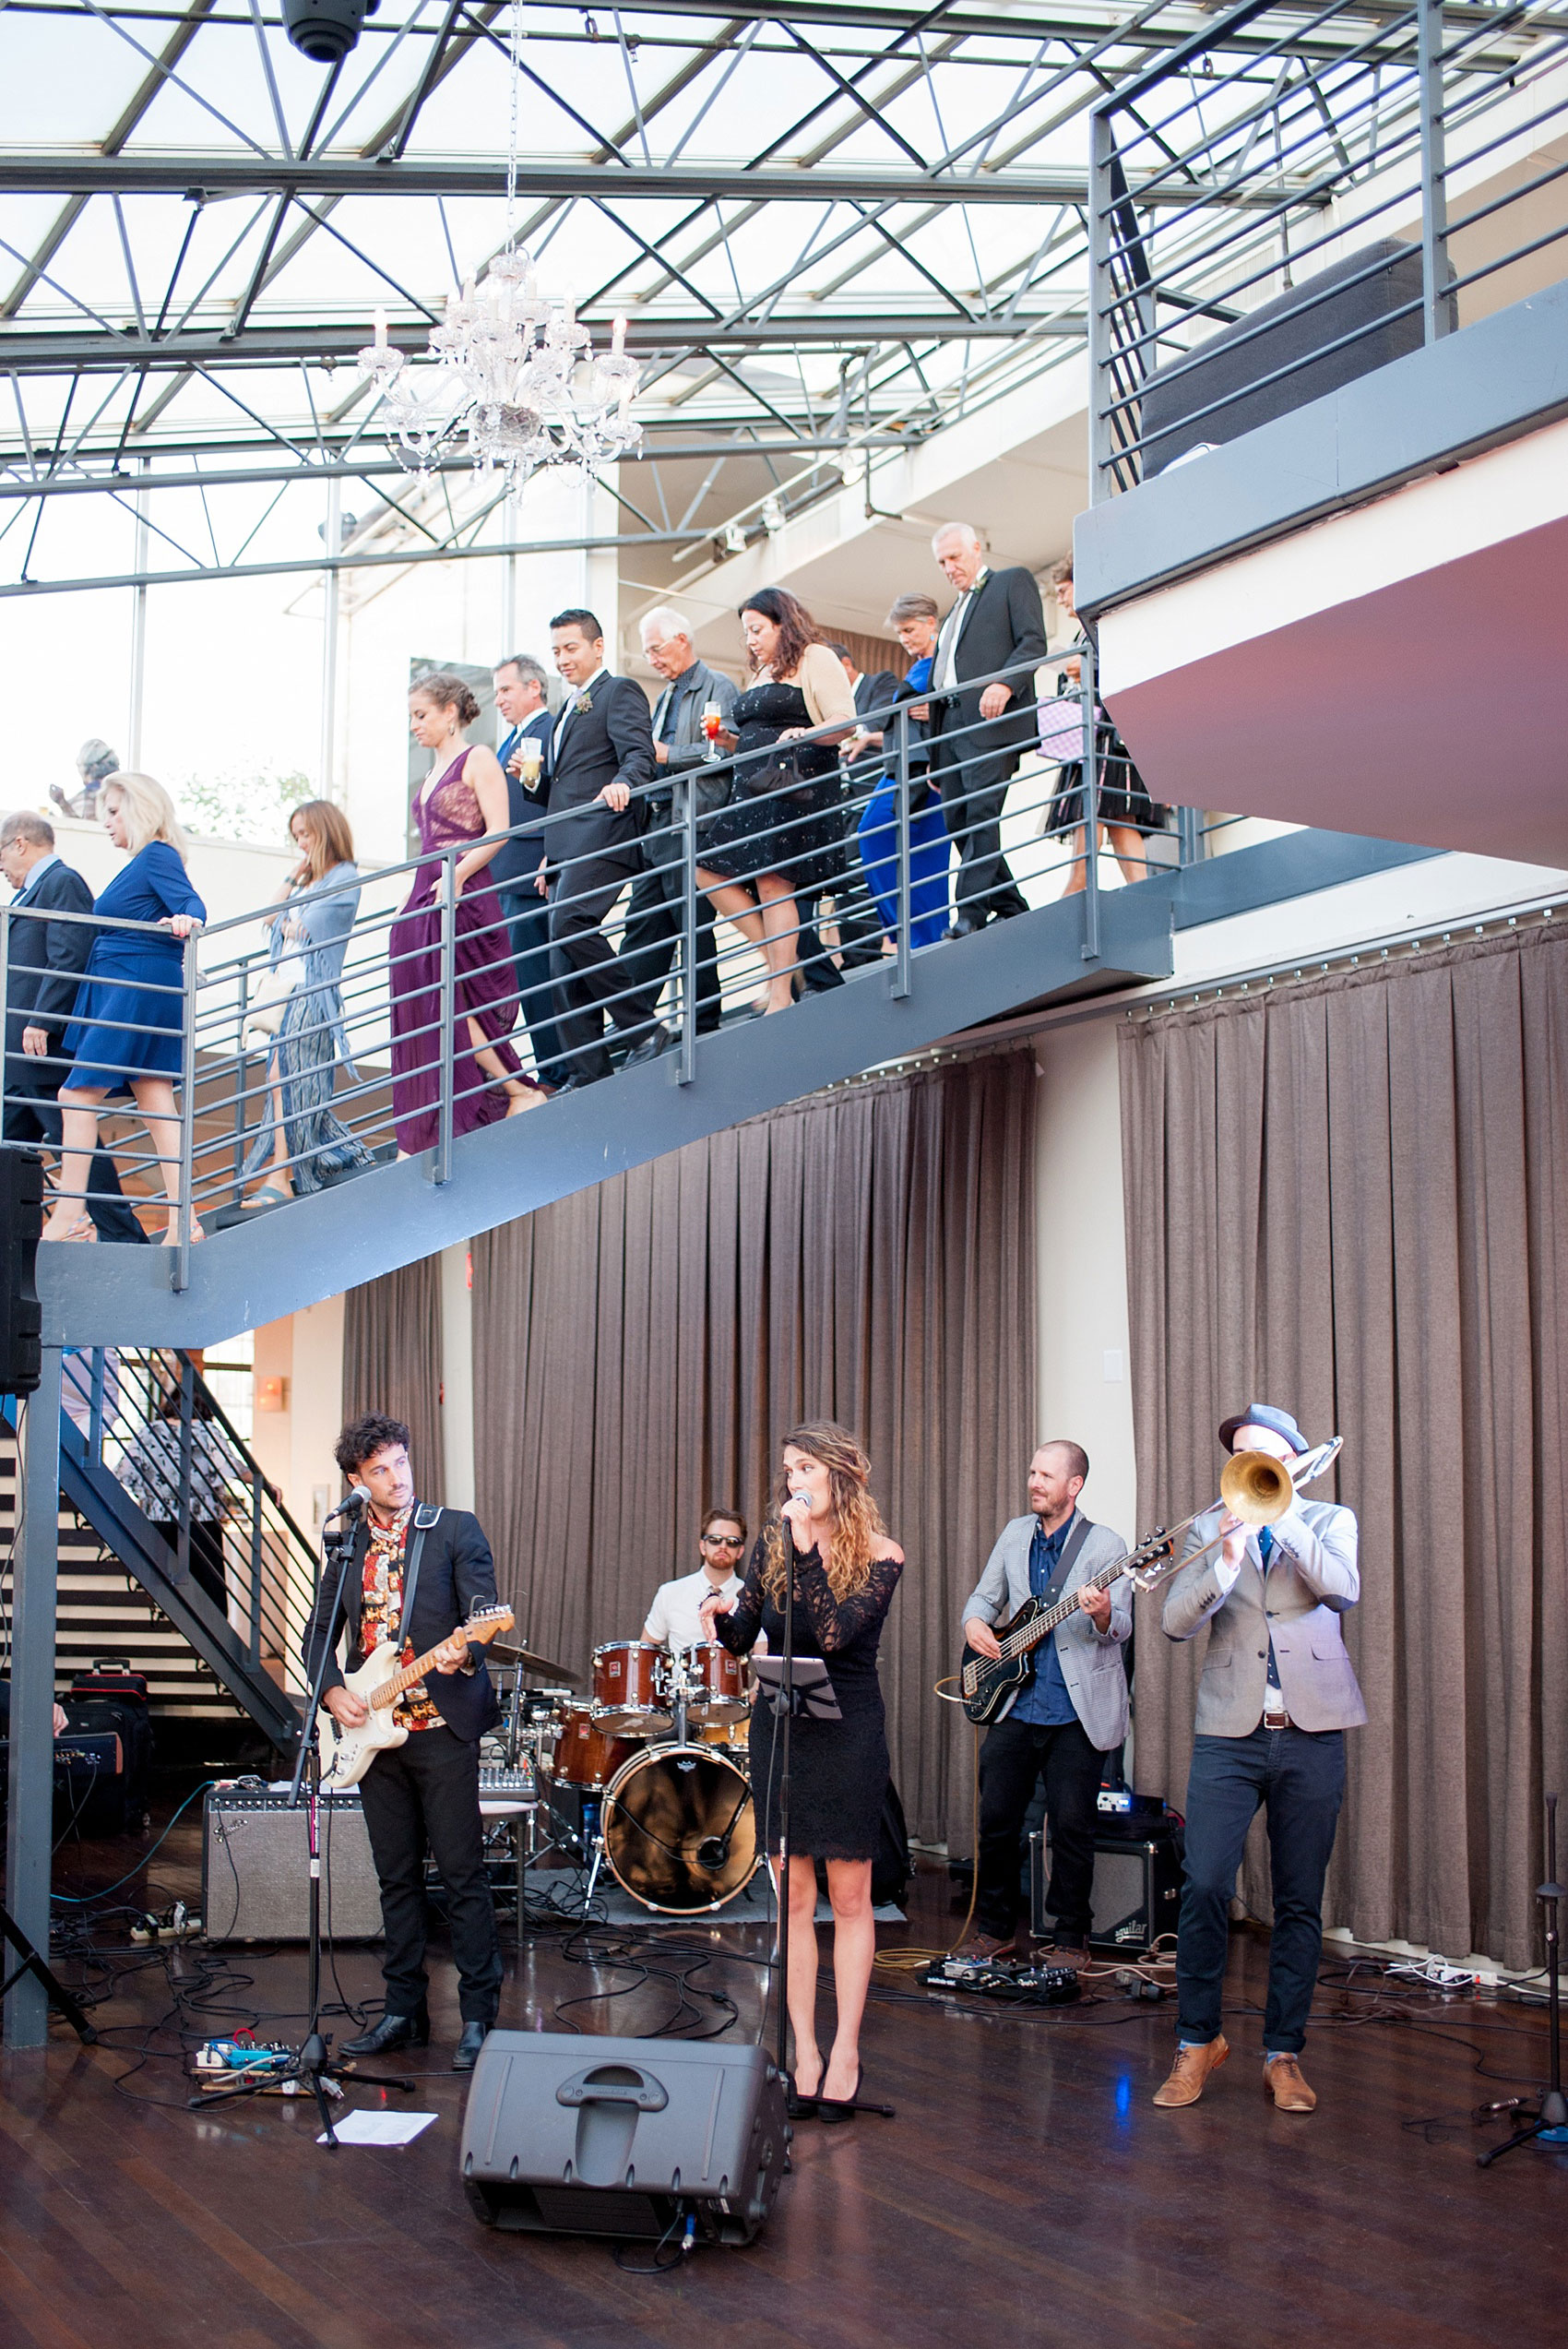 Mikkel Paige Photography photos of a NYC wedding at Tribeca Rooftop. An image of the reception band.